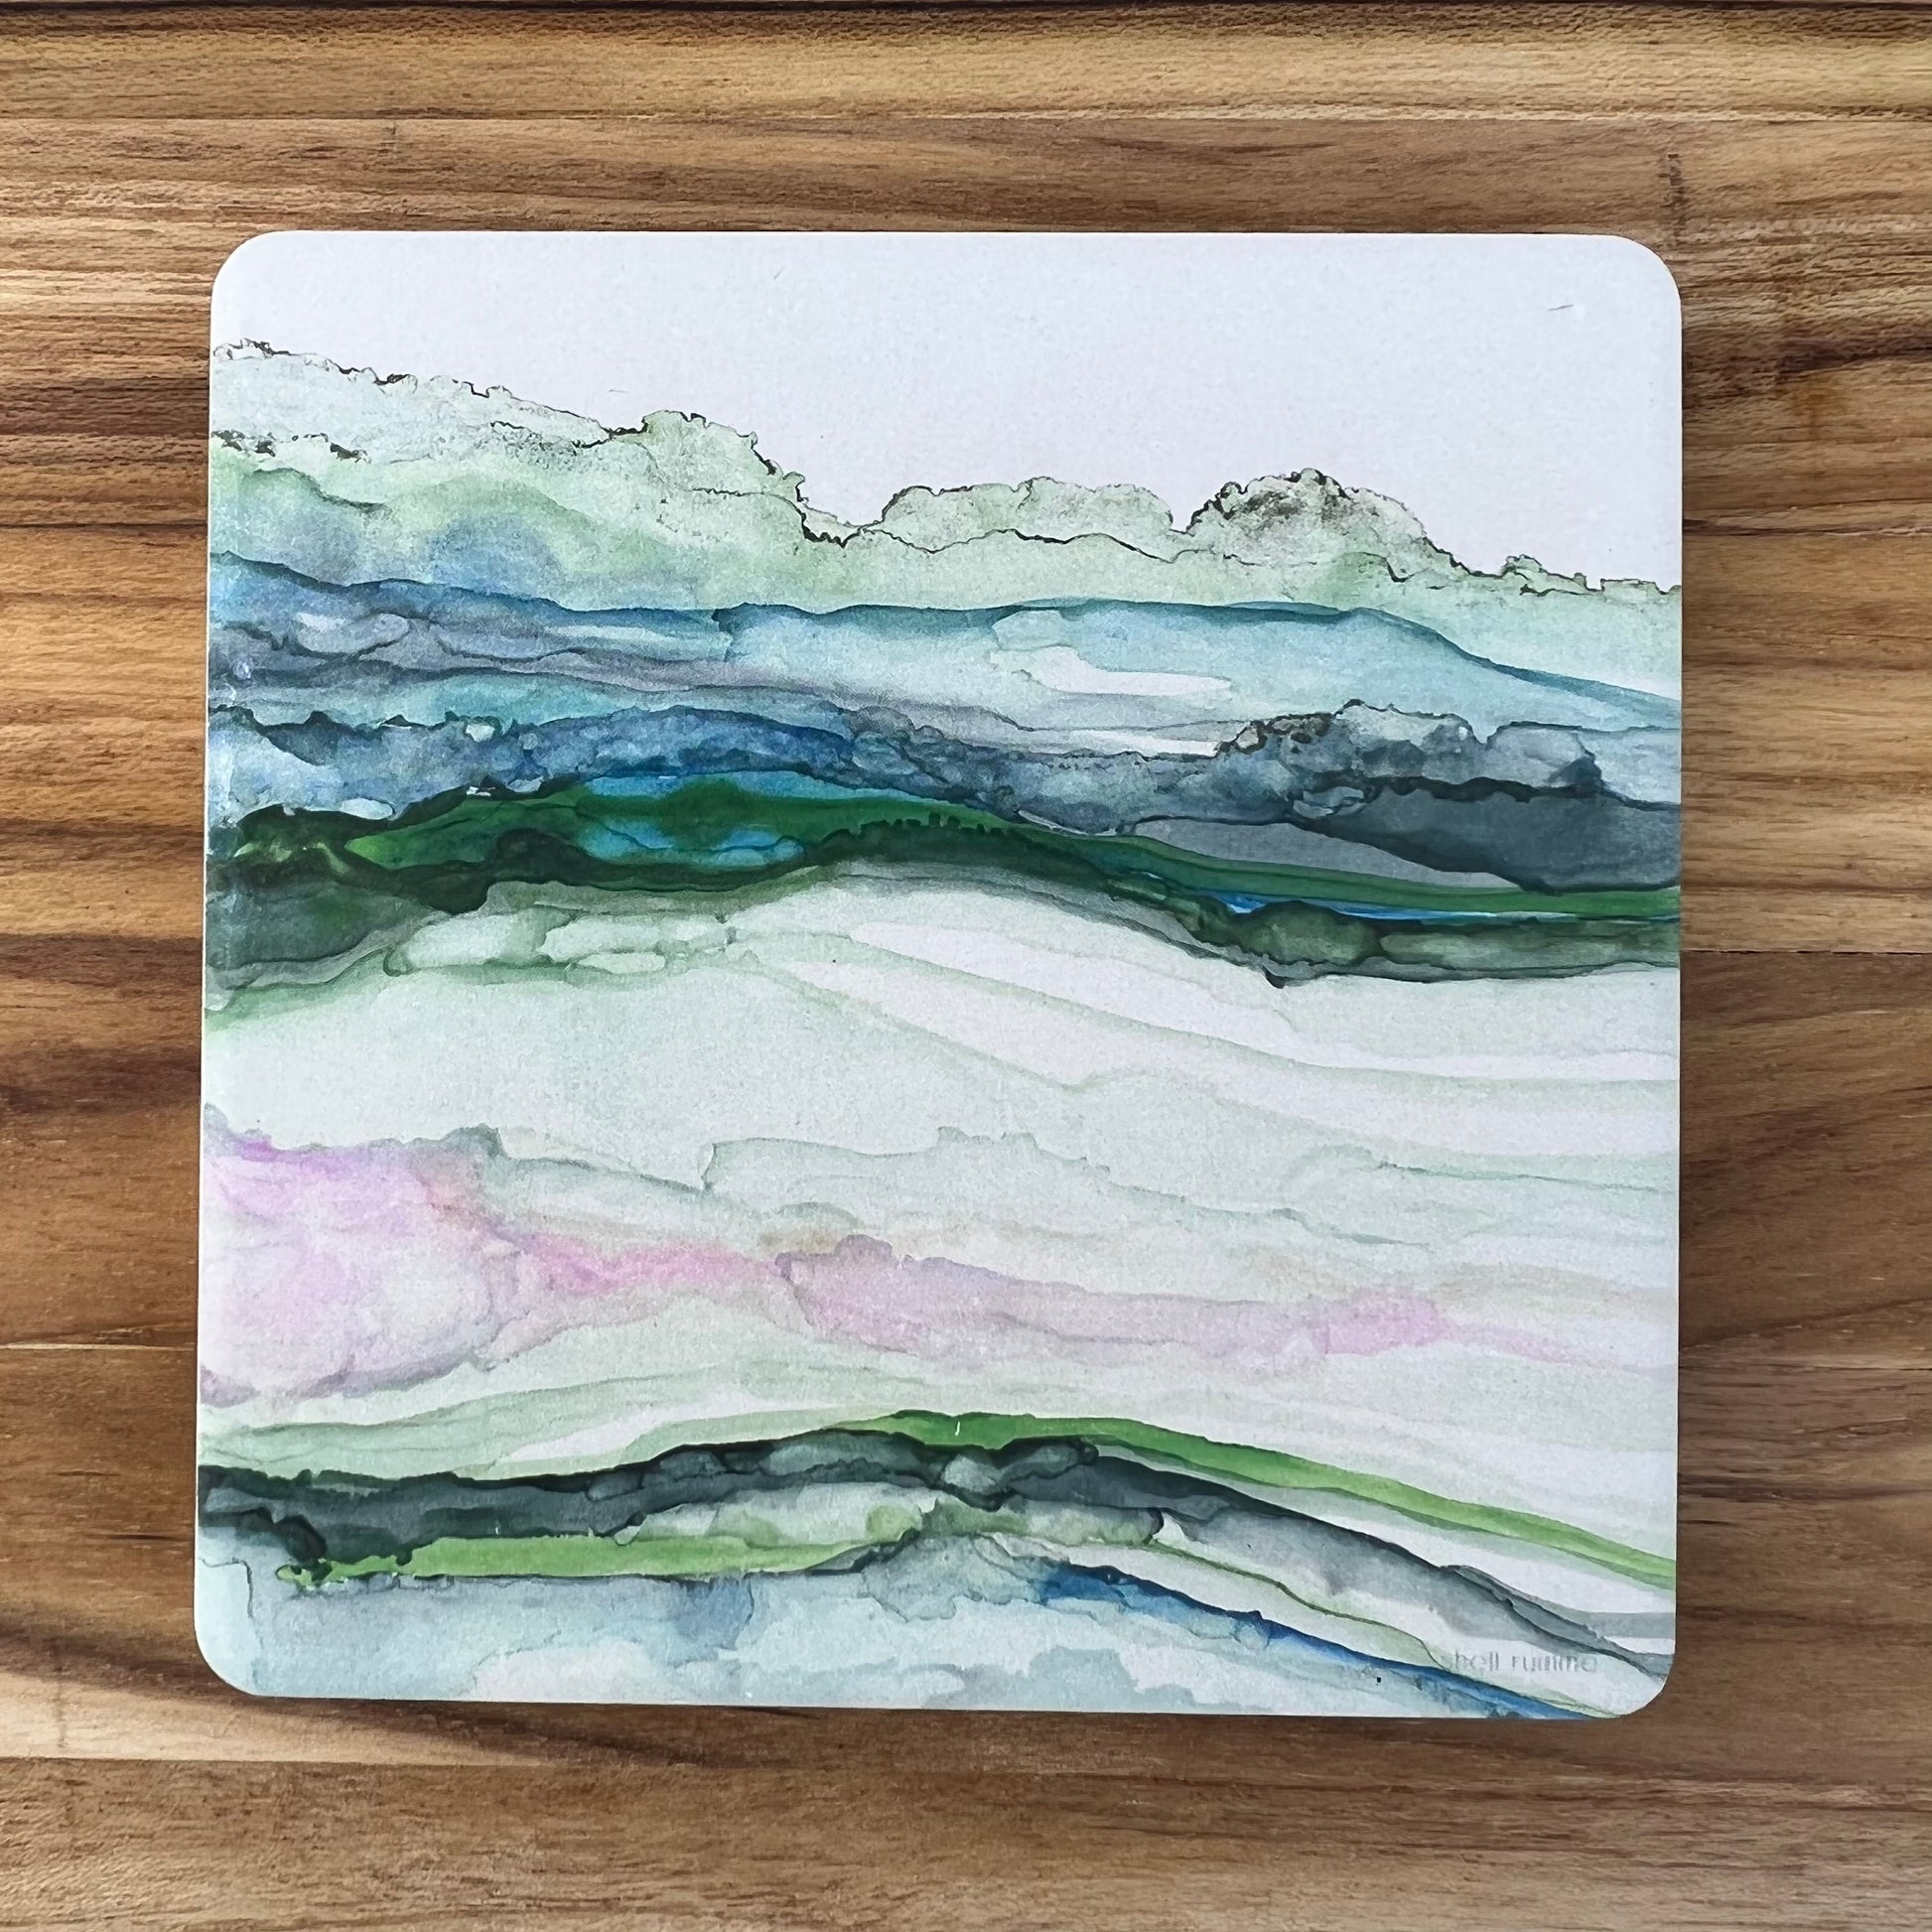 White stone coaster with abstract design of green hills.